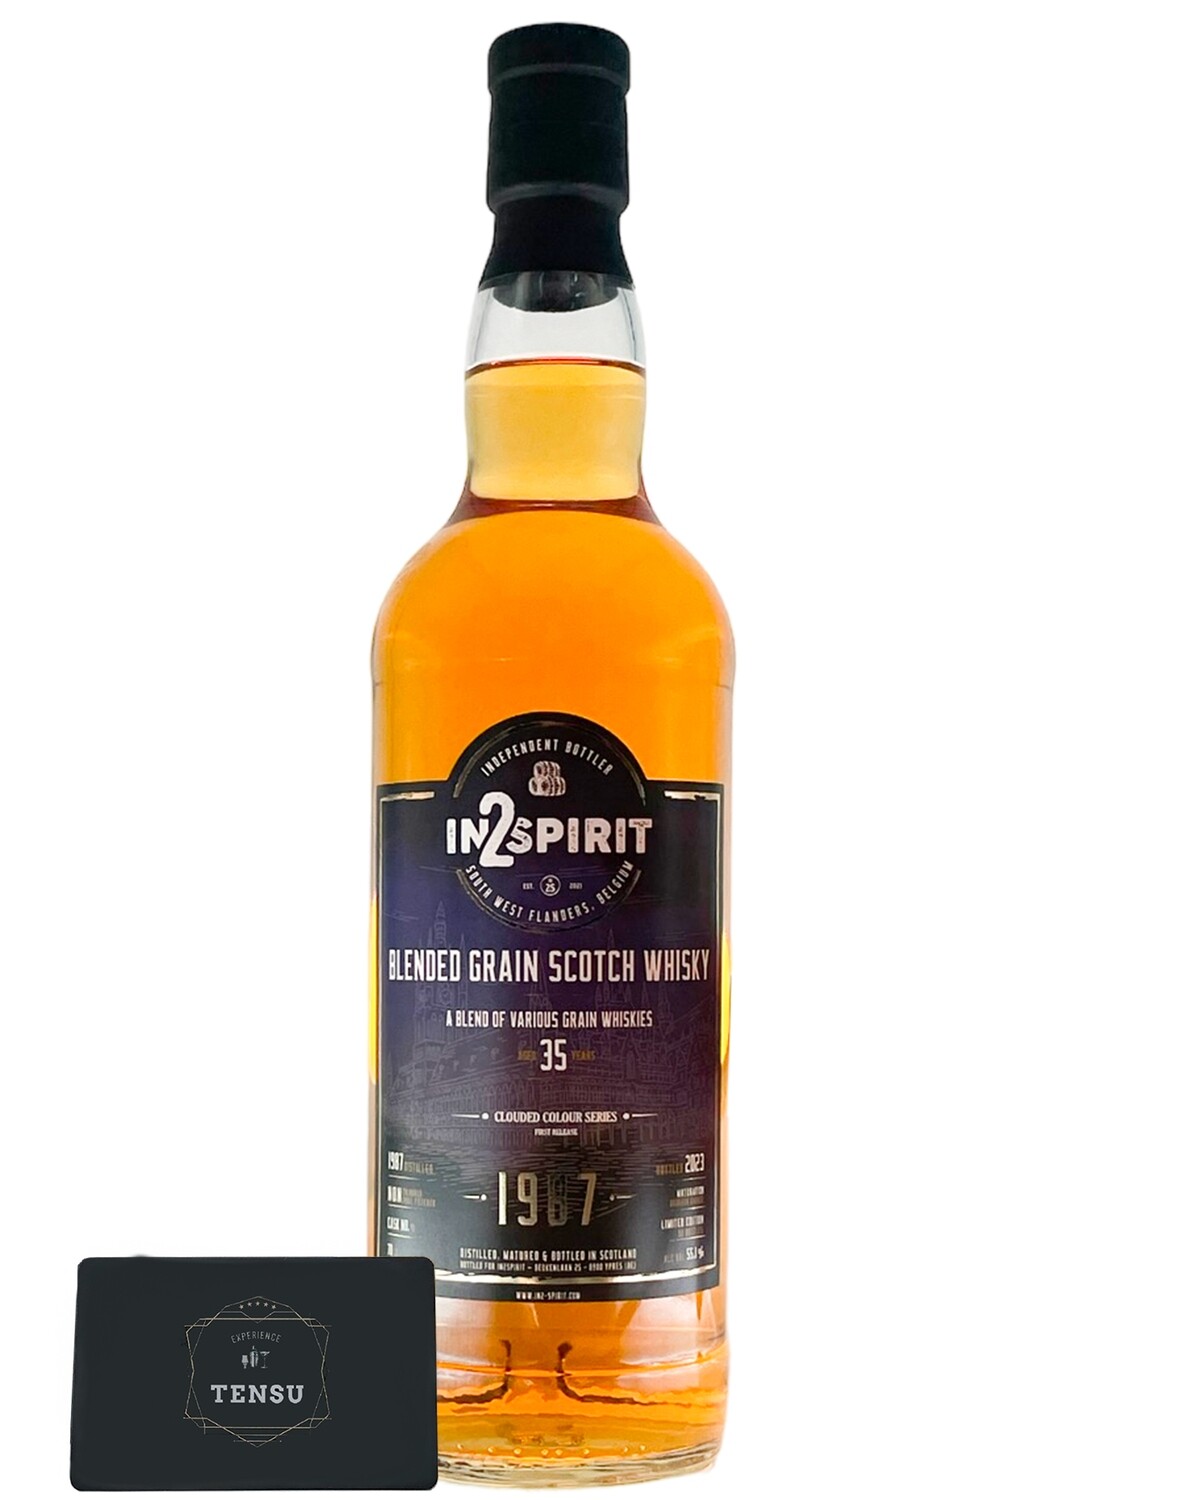 Blended Grain Scotch Whisky 35Y (1987-2023) SC N.06 -Clouded Colour Series- 1st Release 55.1 "In2Spirit"